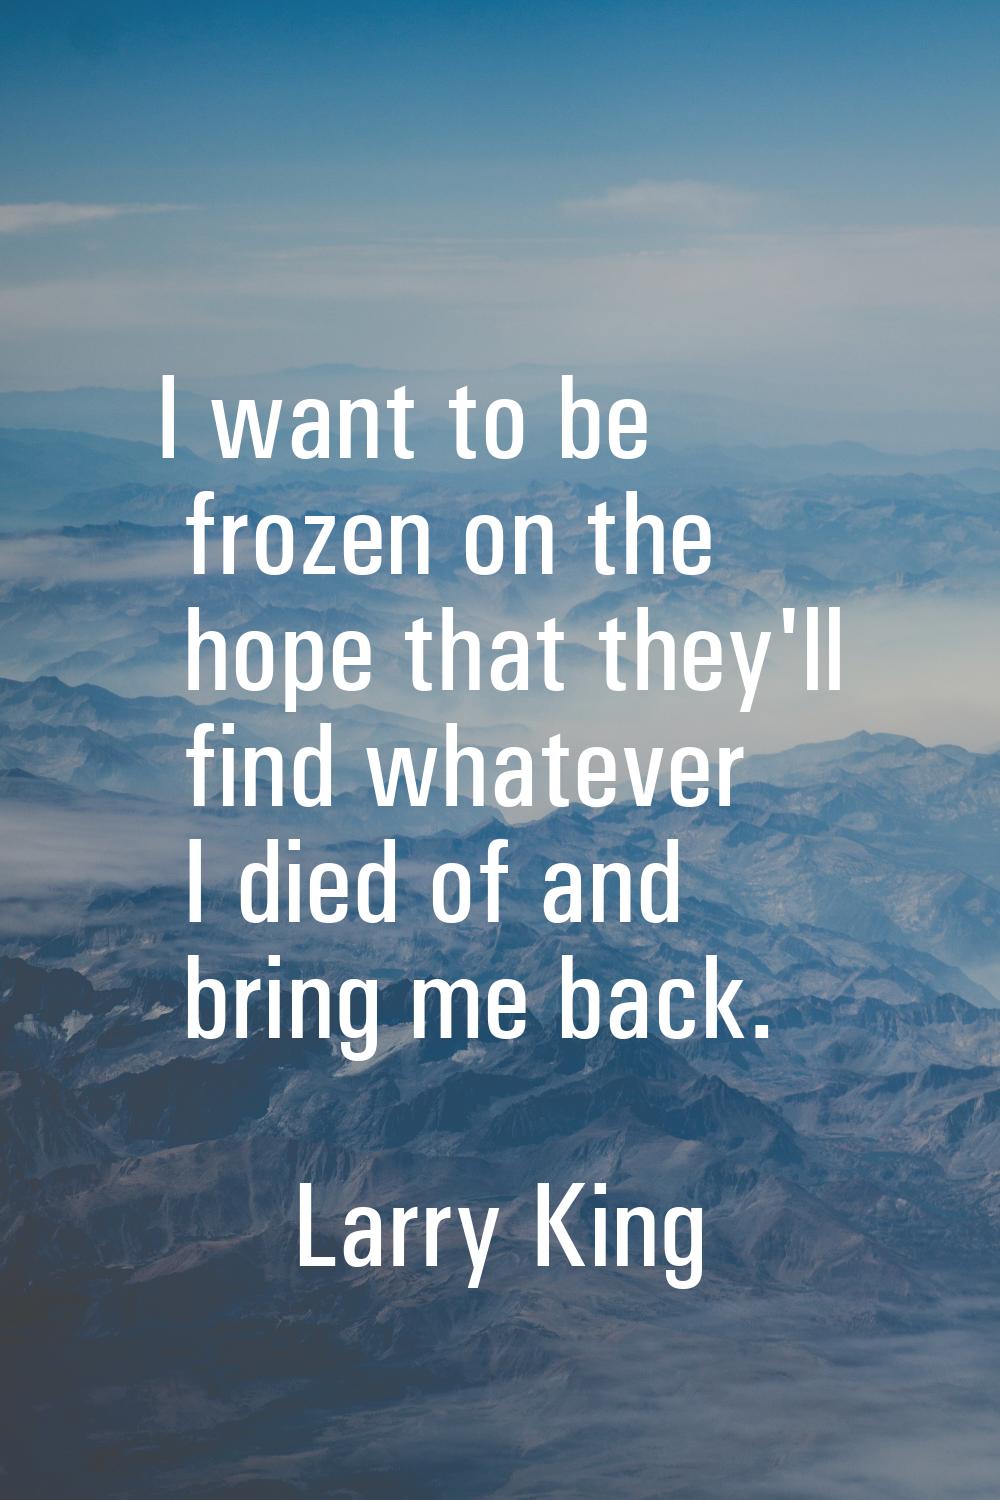 I want to be frozen on the hope that they'll find whatever I died of and bring me back.